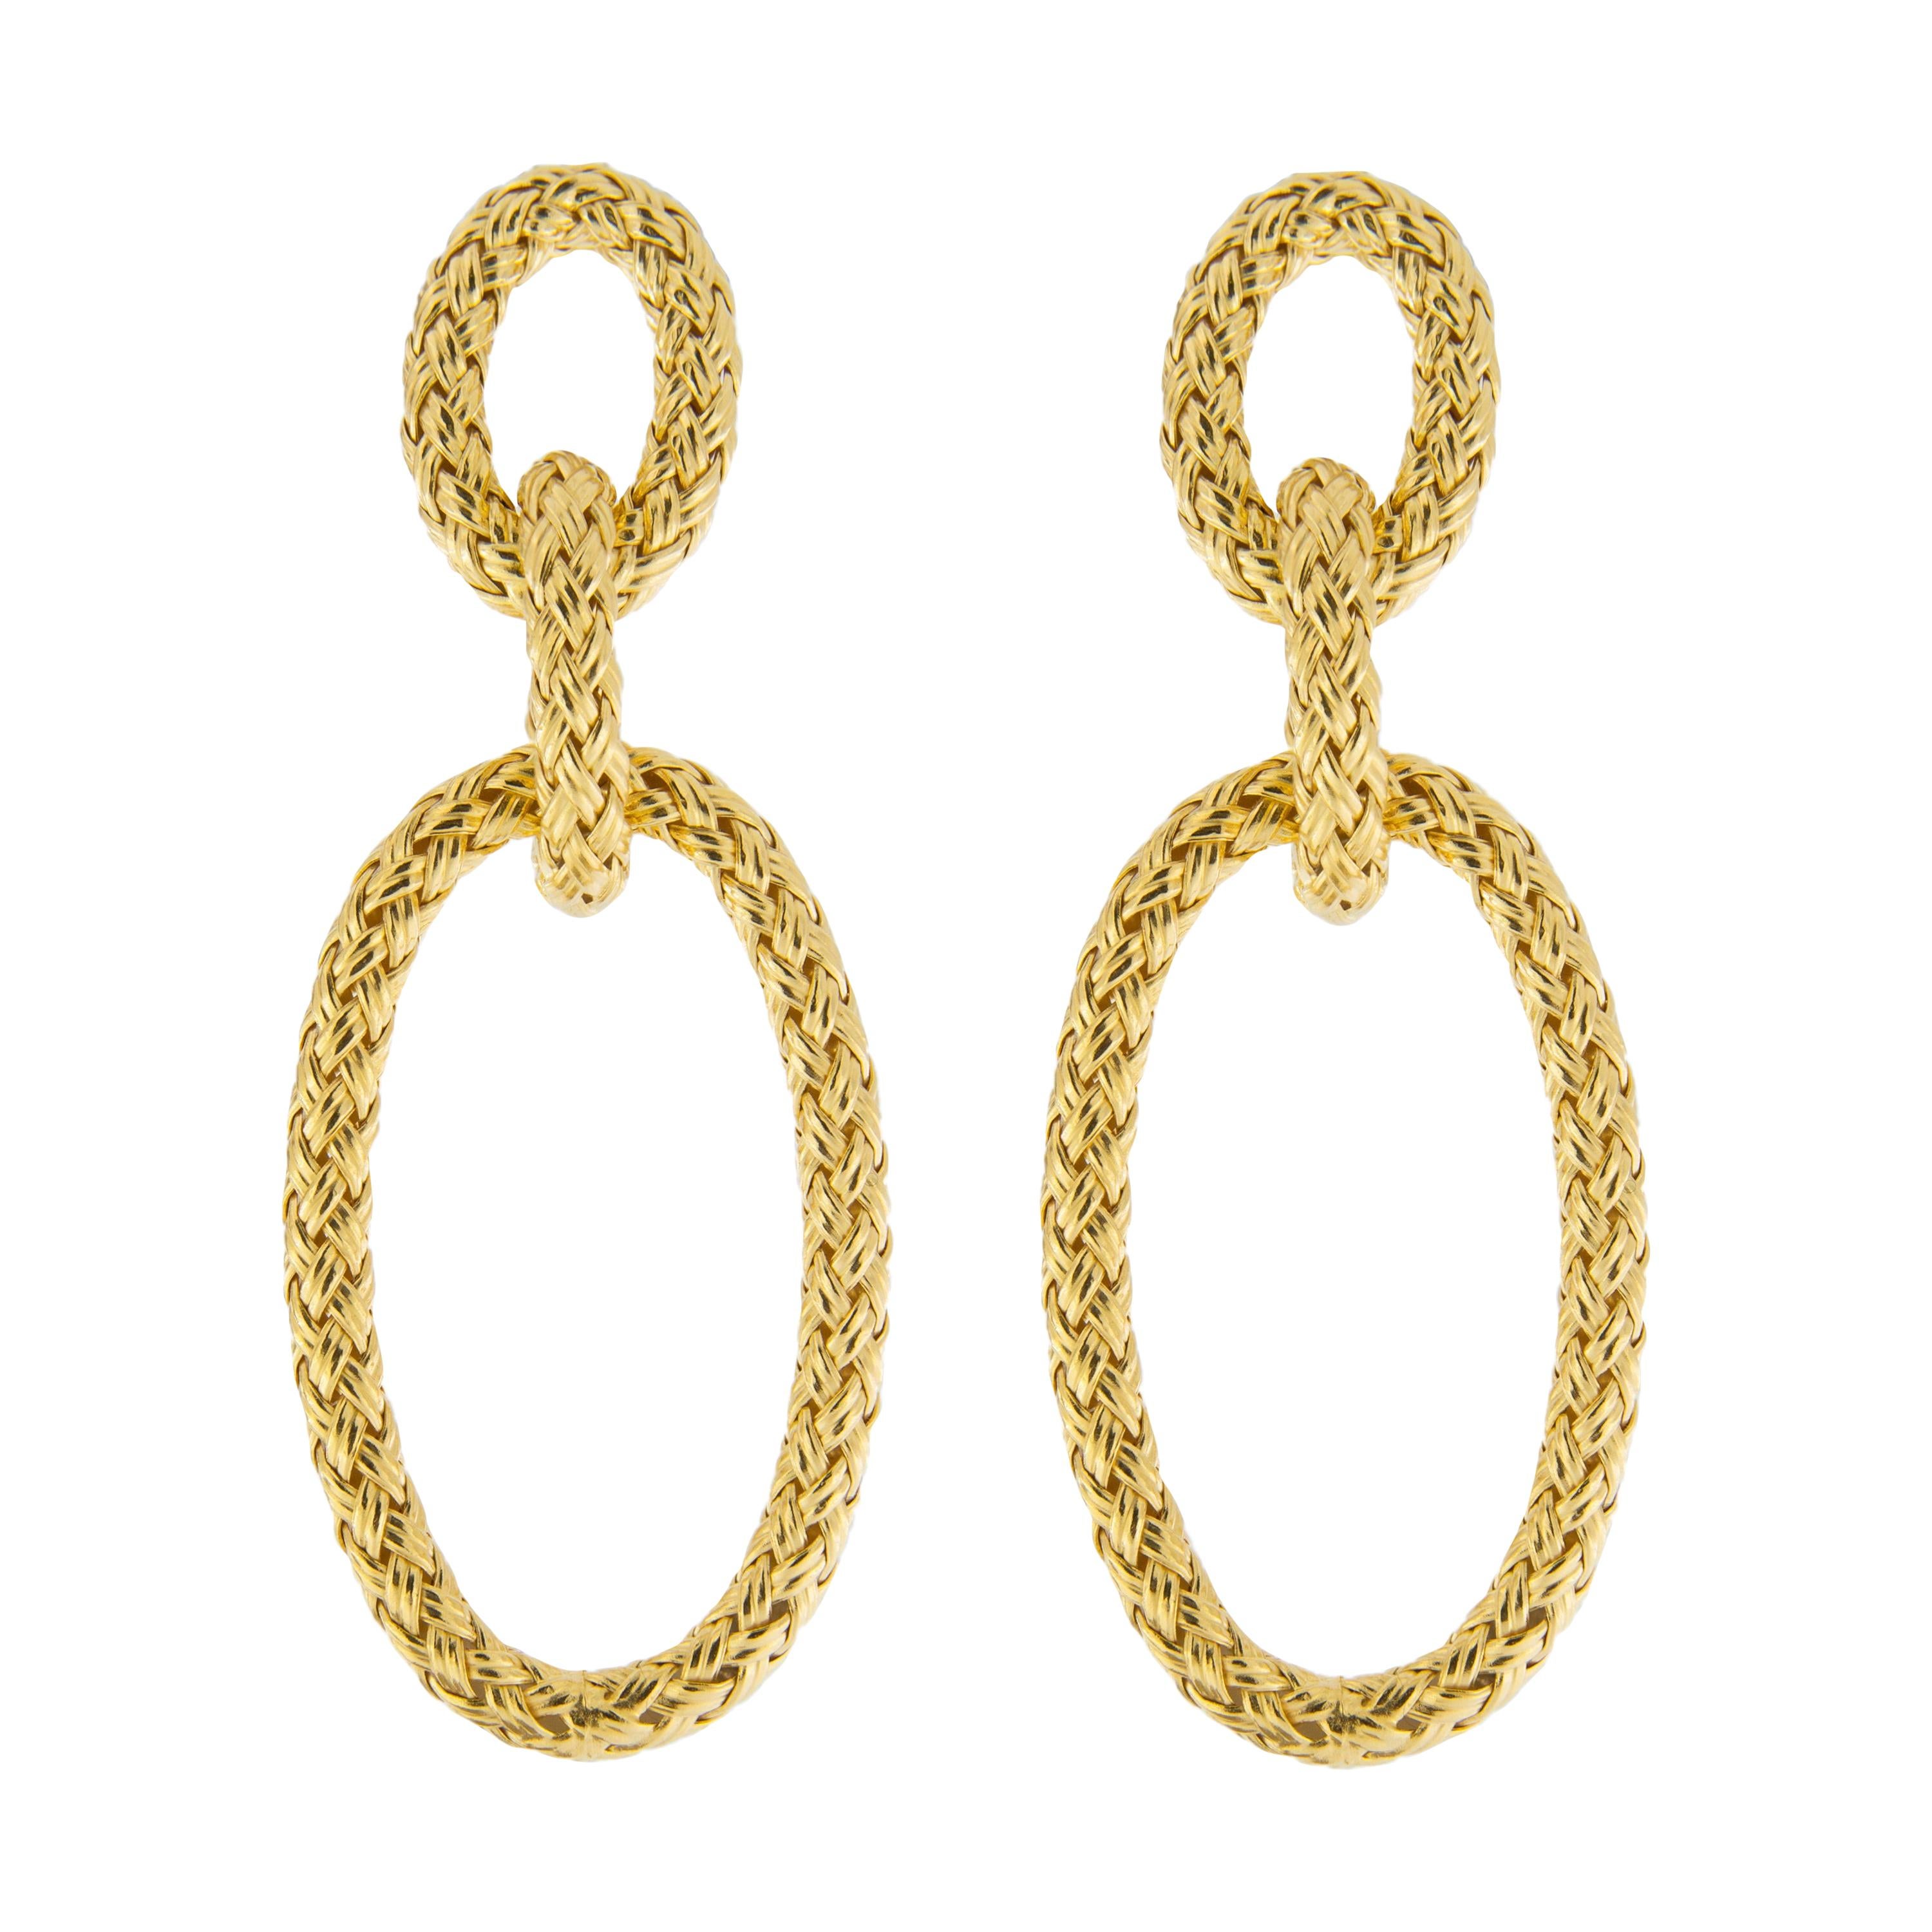 Alex Jona design collection, hand crafted in Italy, gold-plated sterling silver basket weave ear pendants. 
Dimensions: H 2.04 in / 5.20 cm X W 0.78 in / 19.86 mm X D 0.11 in / 2.98 mm
Weight: 8.7 g

Alex Jona jewels stand out, not only for their